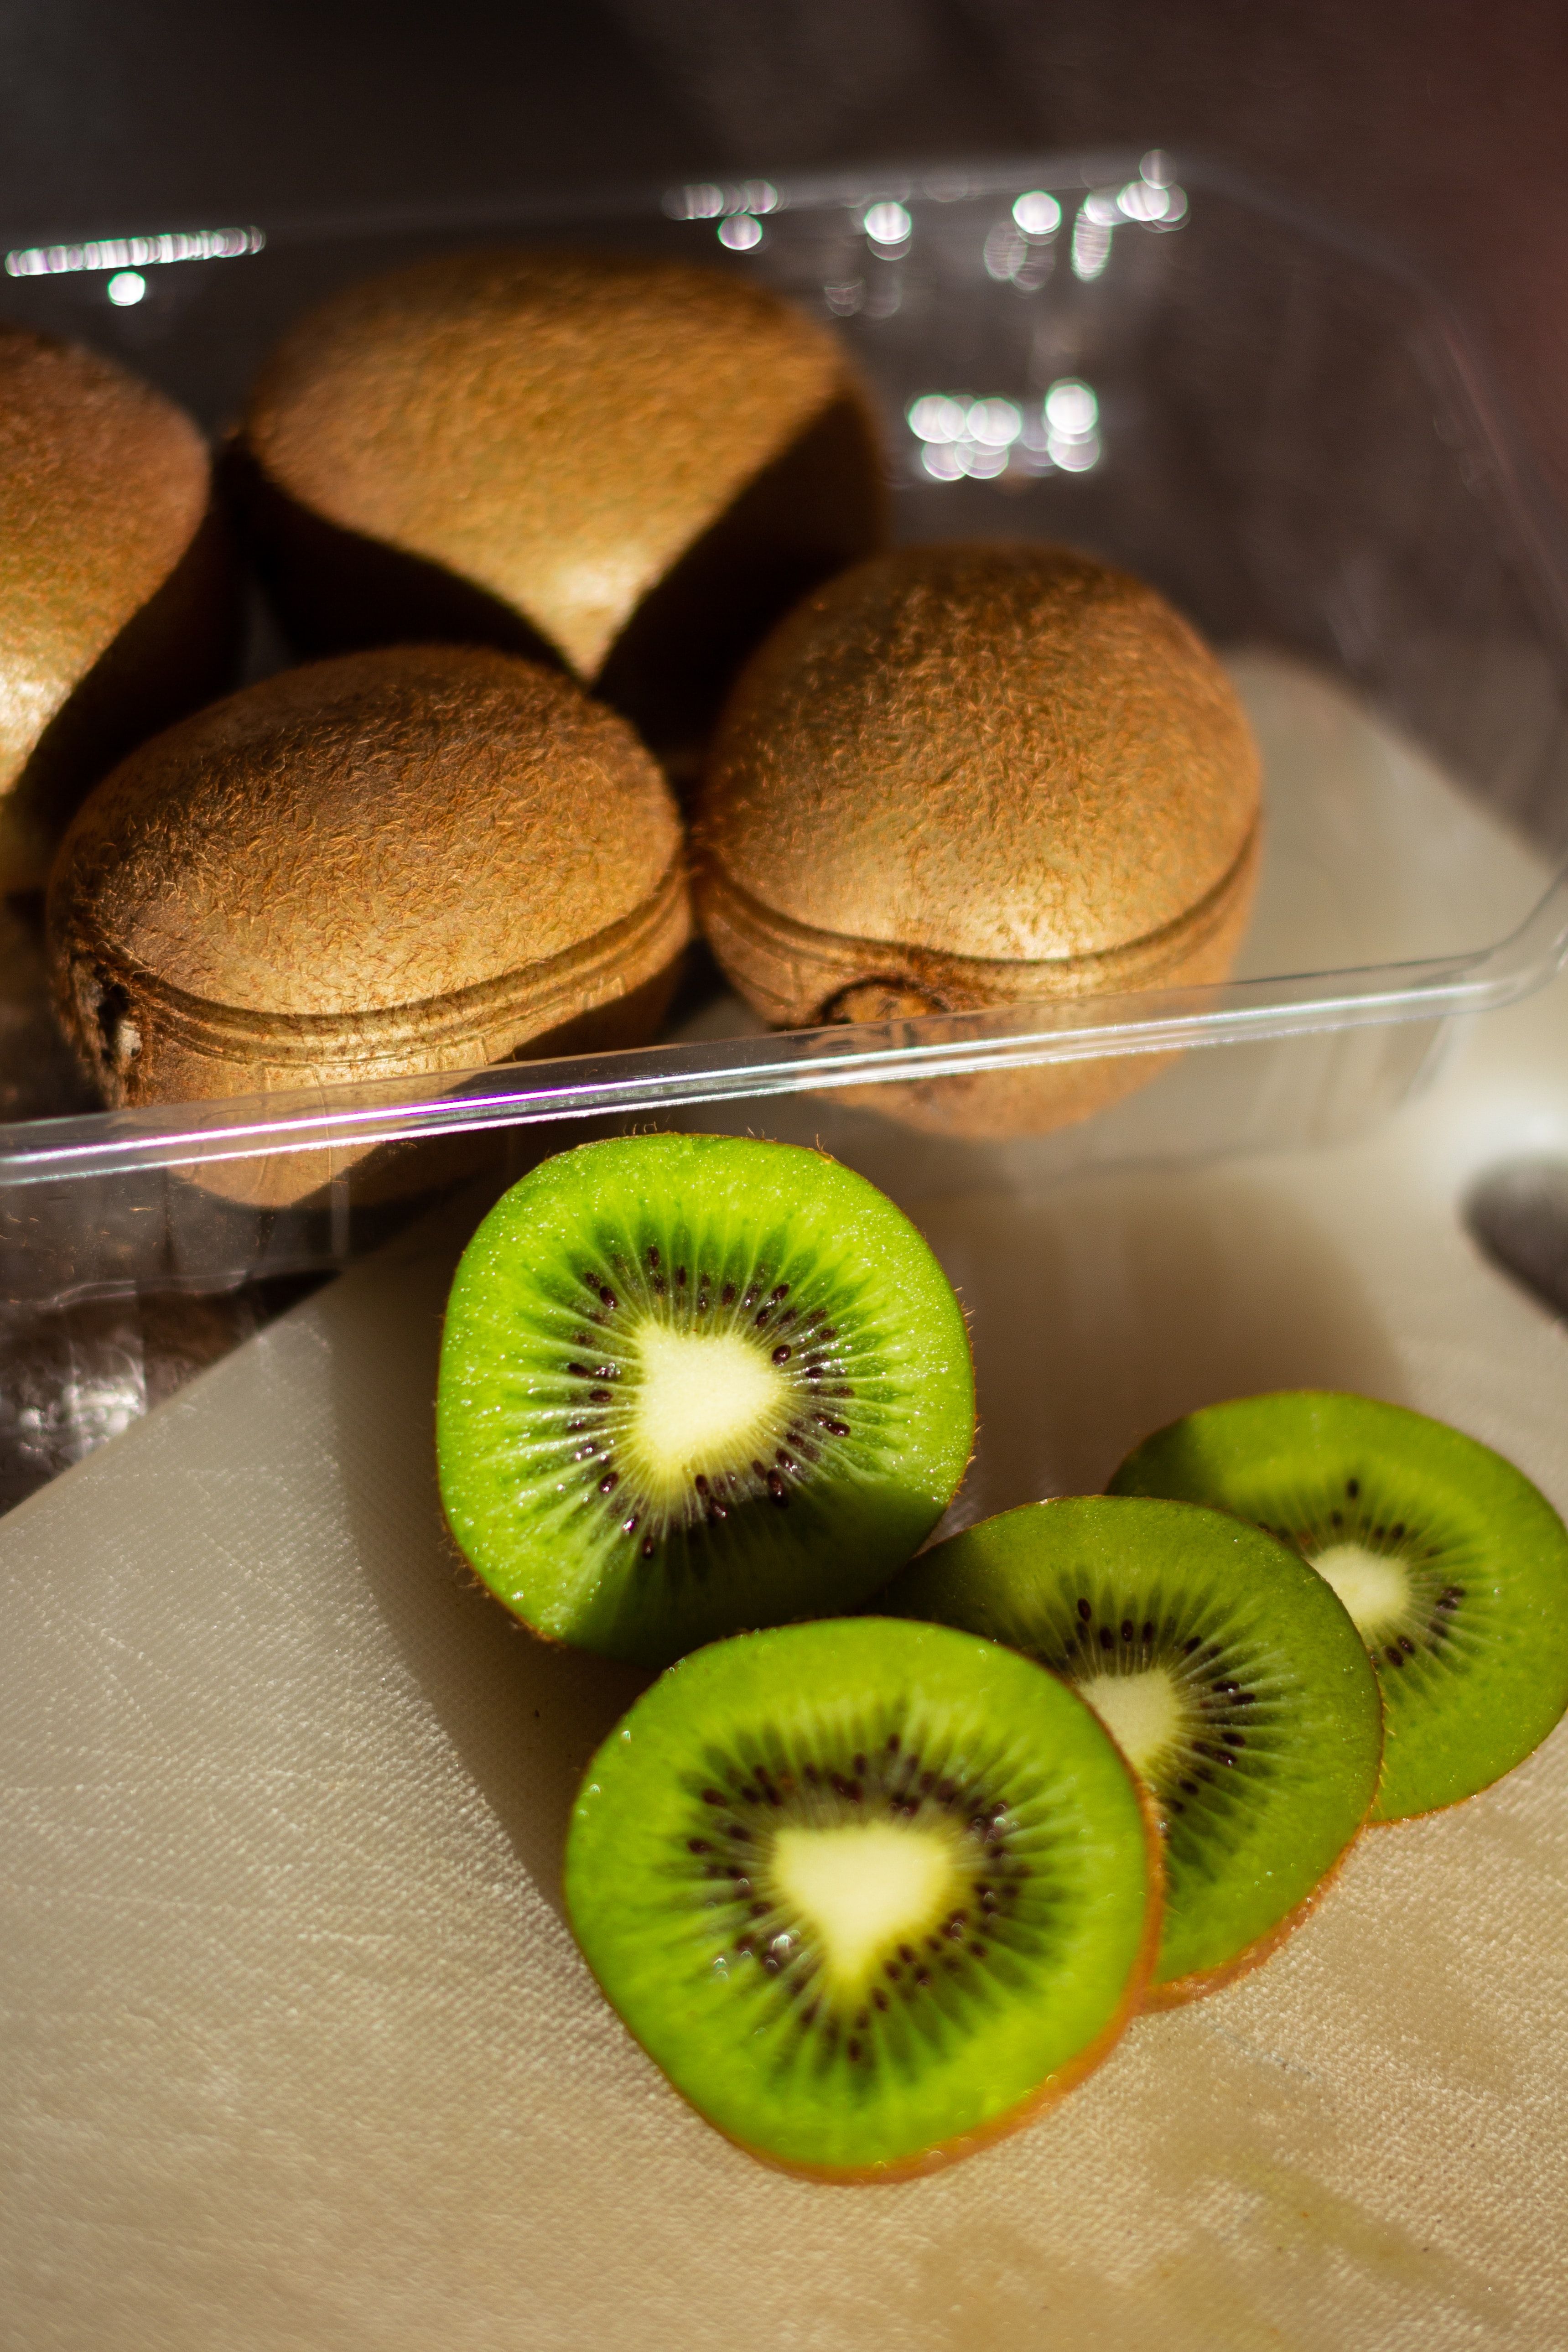 What is a kiwi allergy?